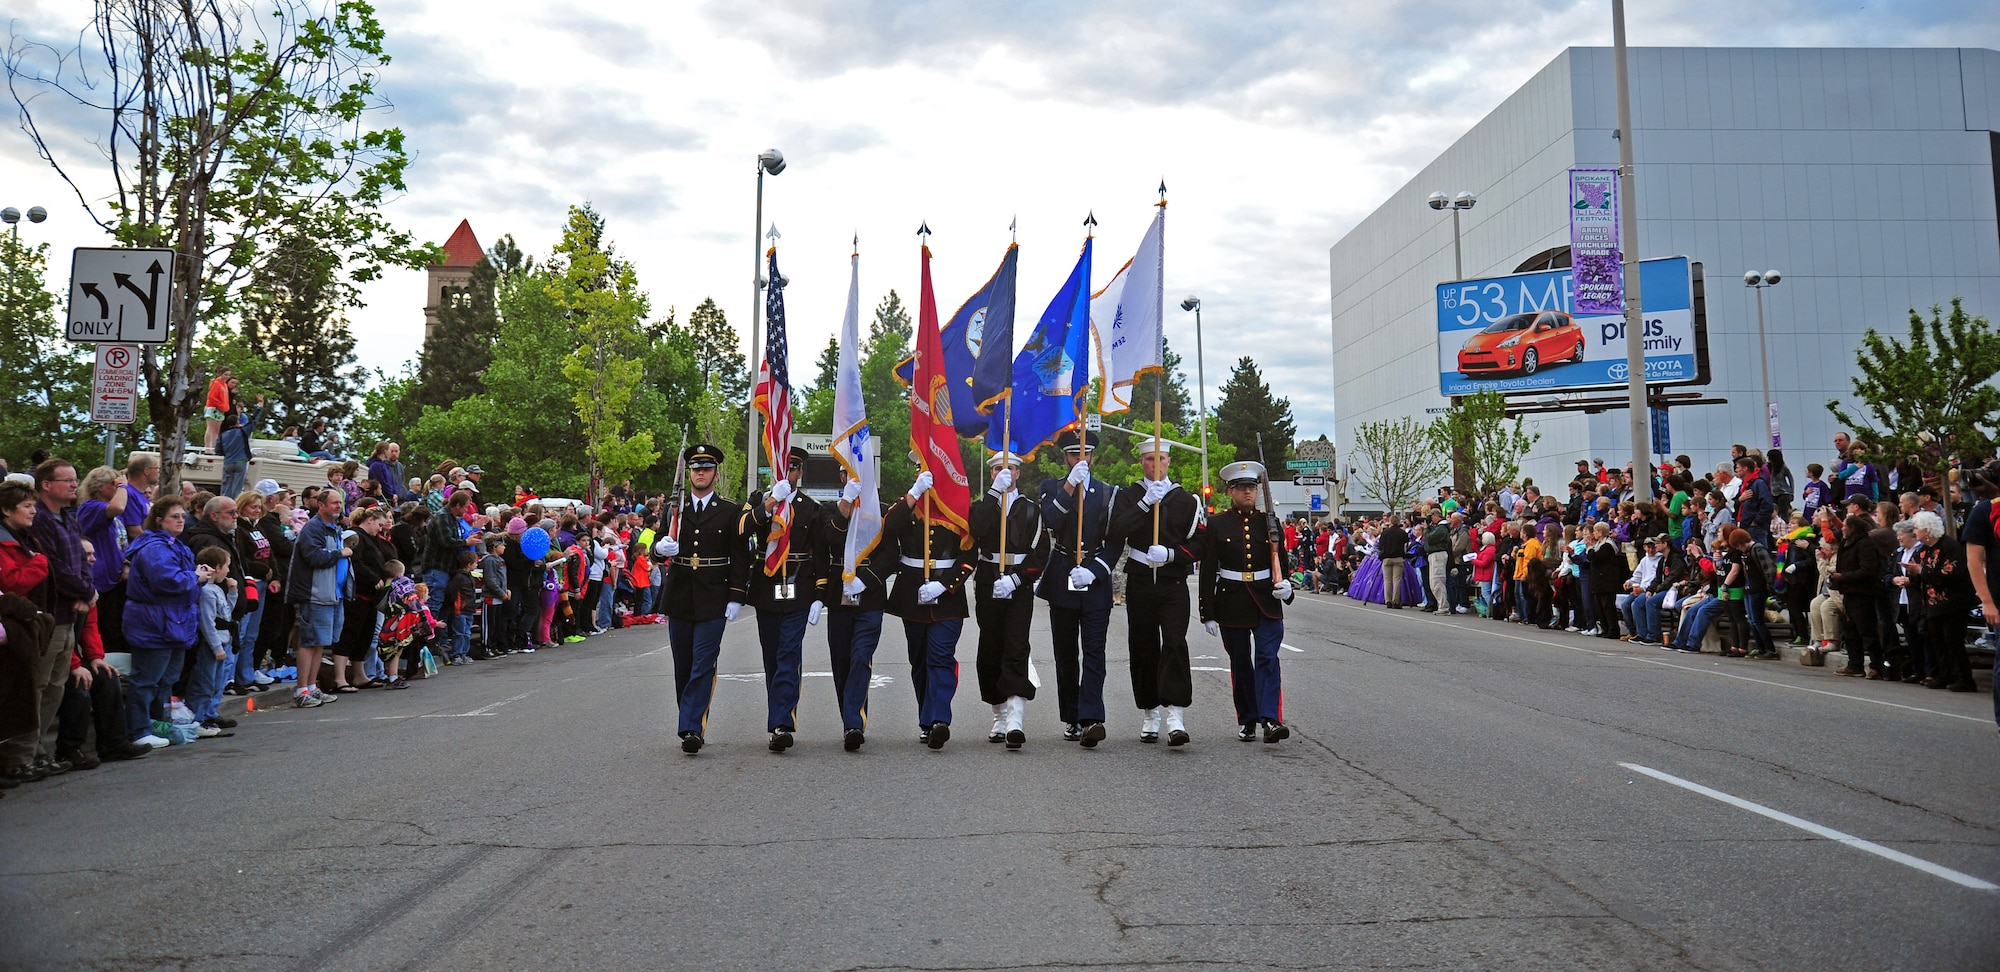 A joint-service honor guard colors team led the Lilac Festival’s Armed Forces Torchlight Parade in Spokane, Wash., May 18, 2013. The parade is considered the nation’s largest Torchlight Parade on Armed Forces Day. (U.S. Air Force photo by Senior Airman Taylor Curry)